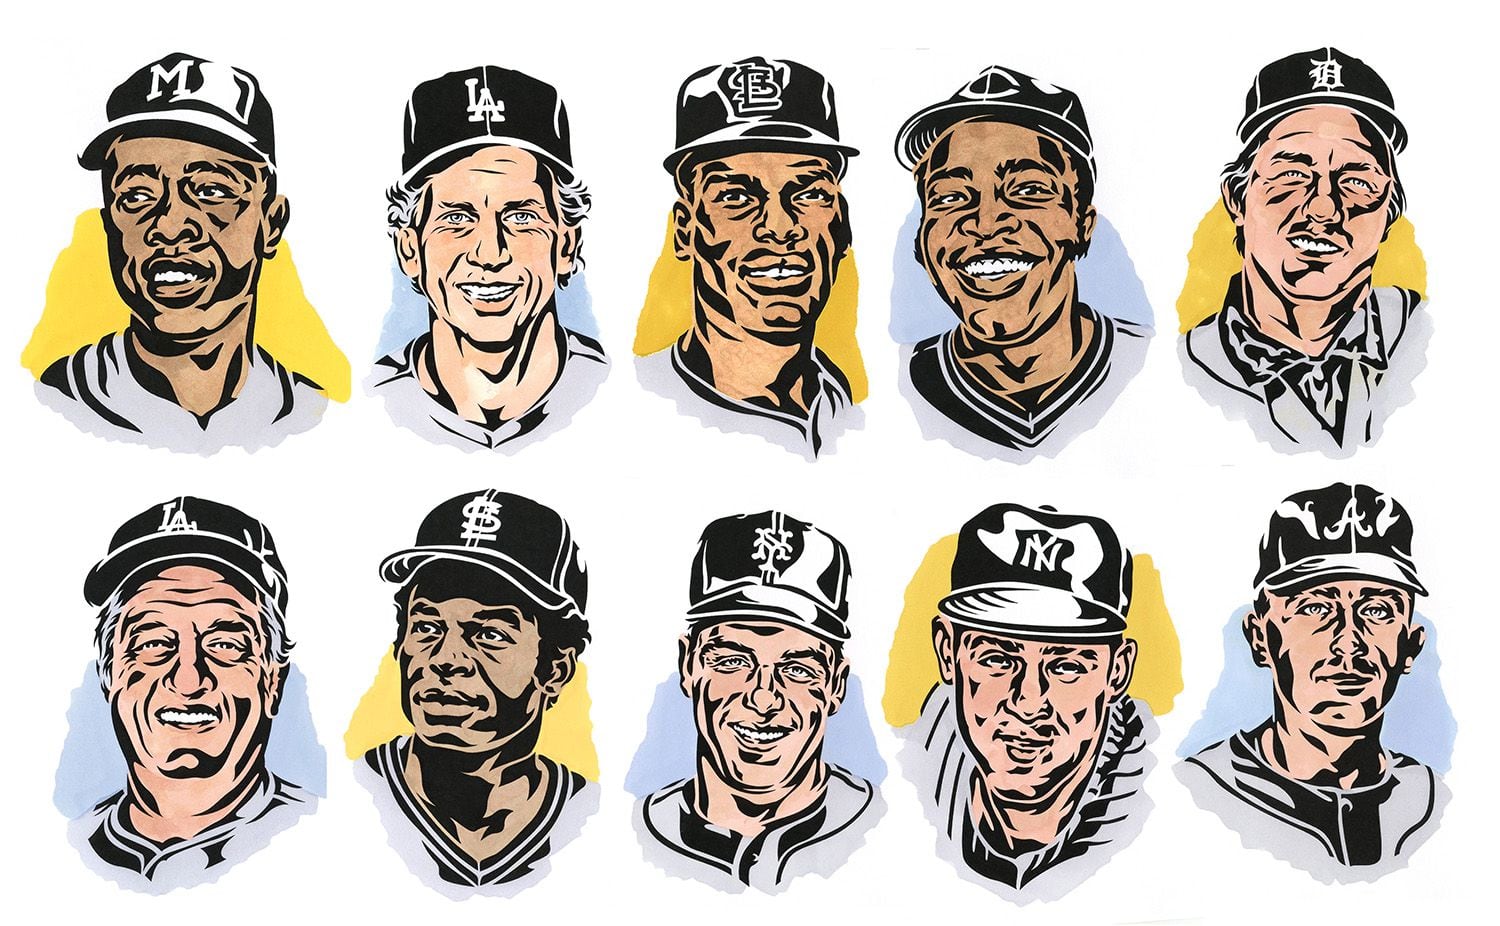 America lost 10 Baseball Hall of Famers in 10 months, and I lost